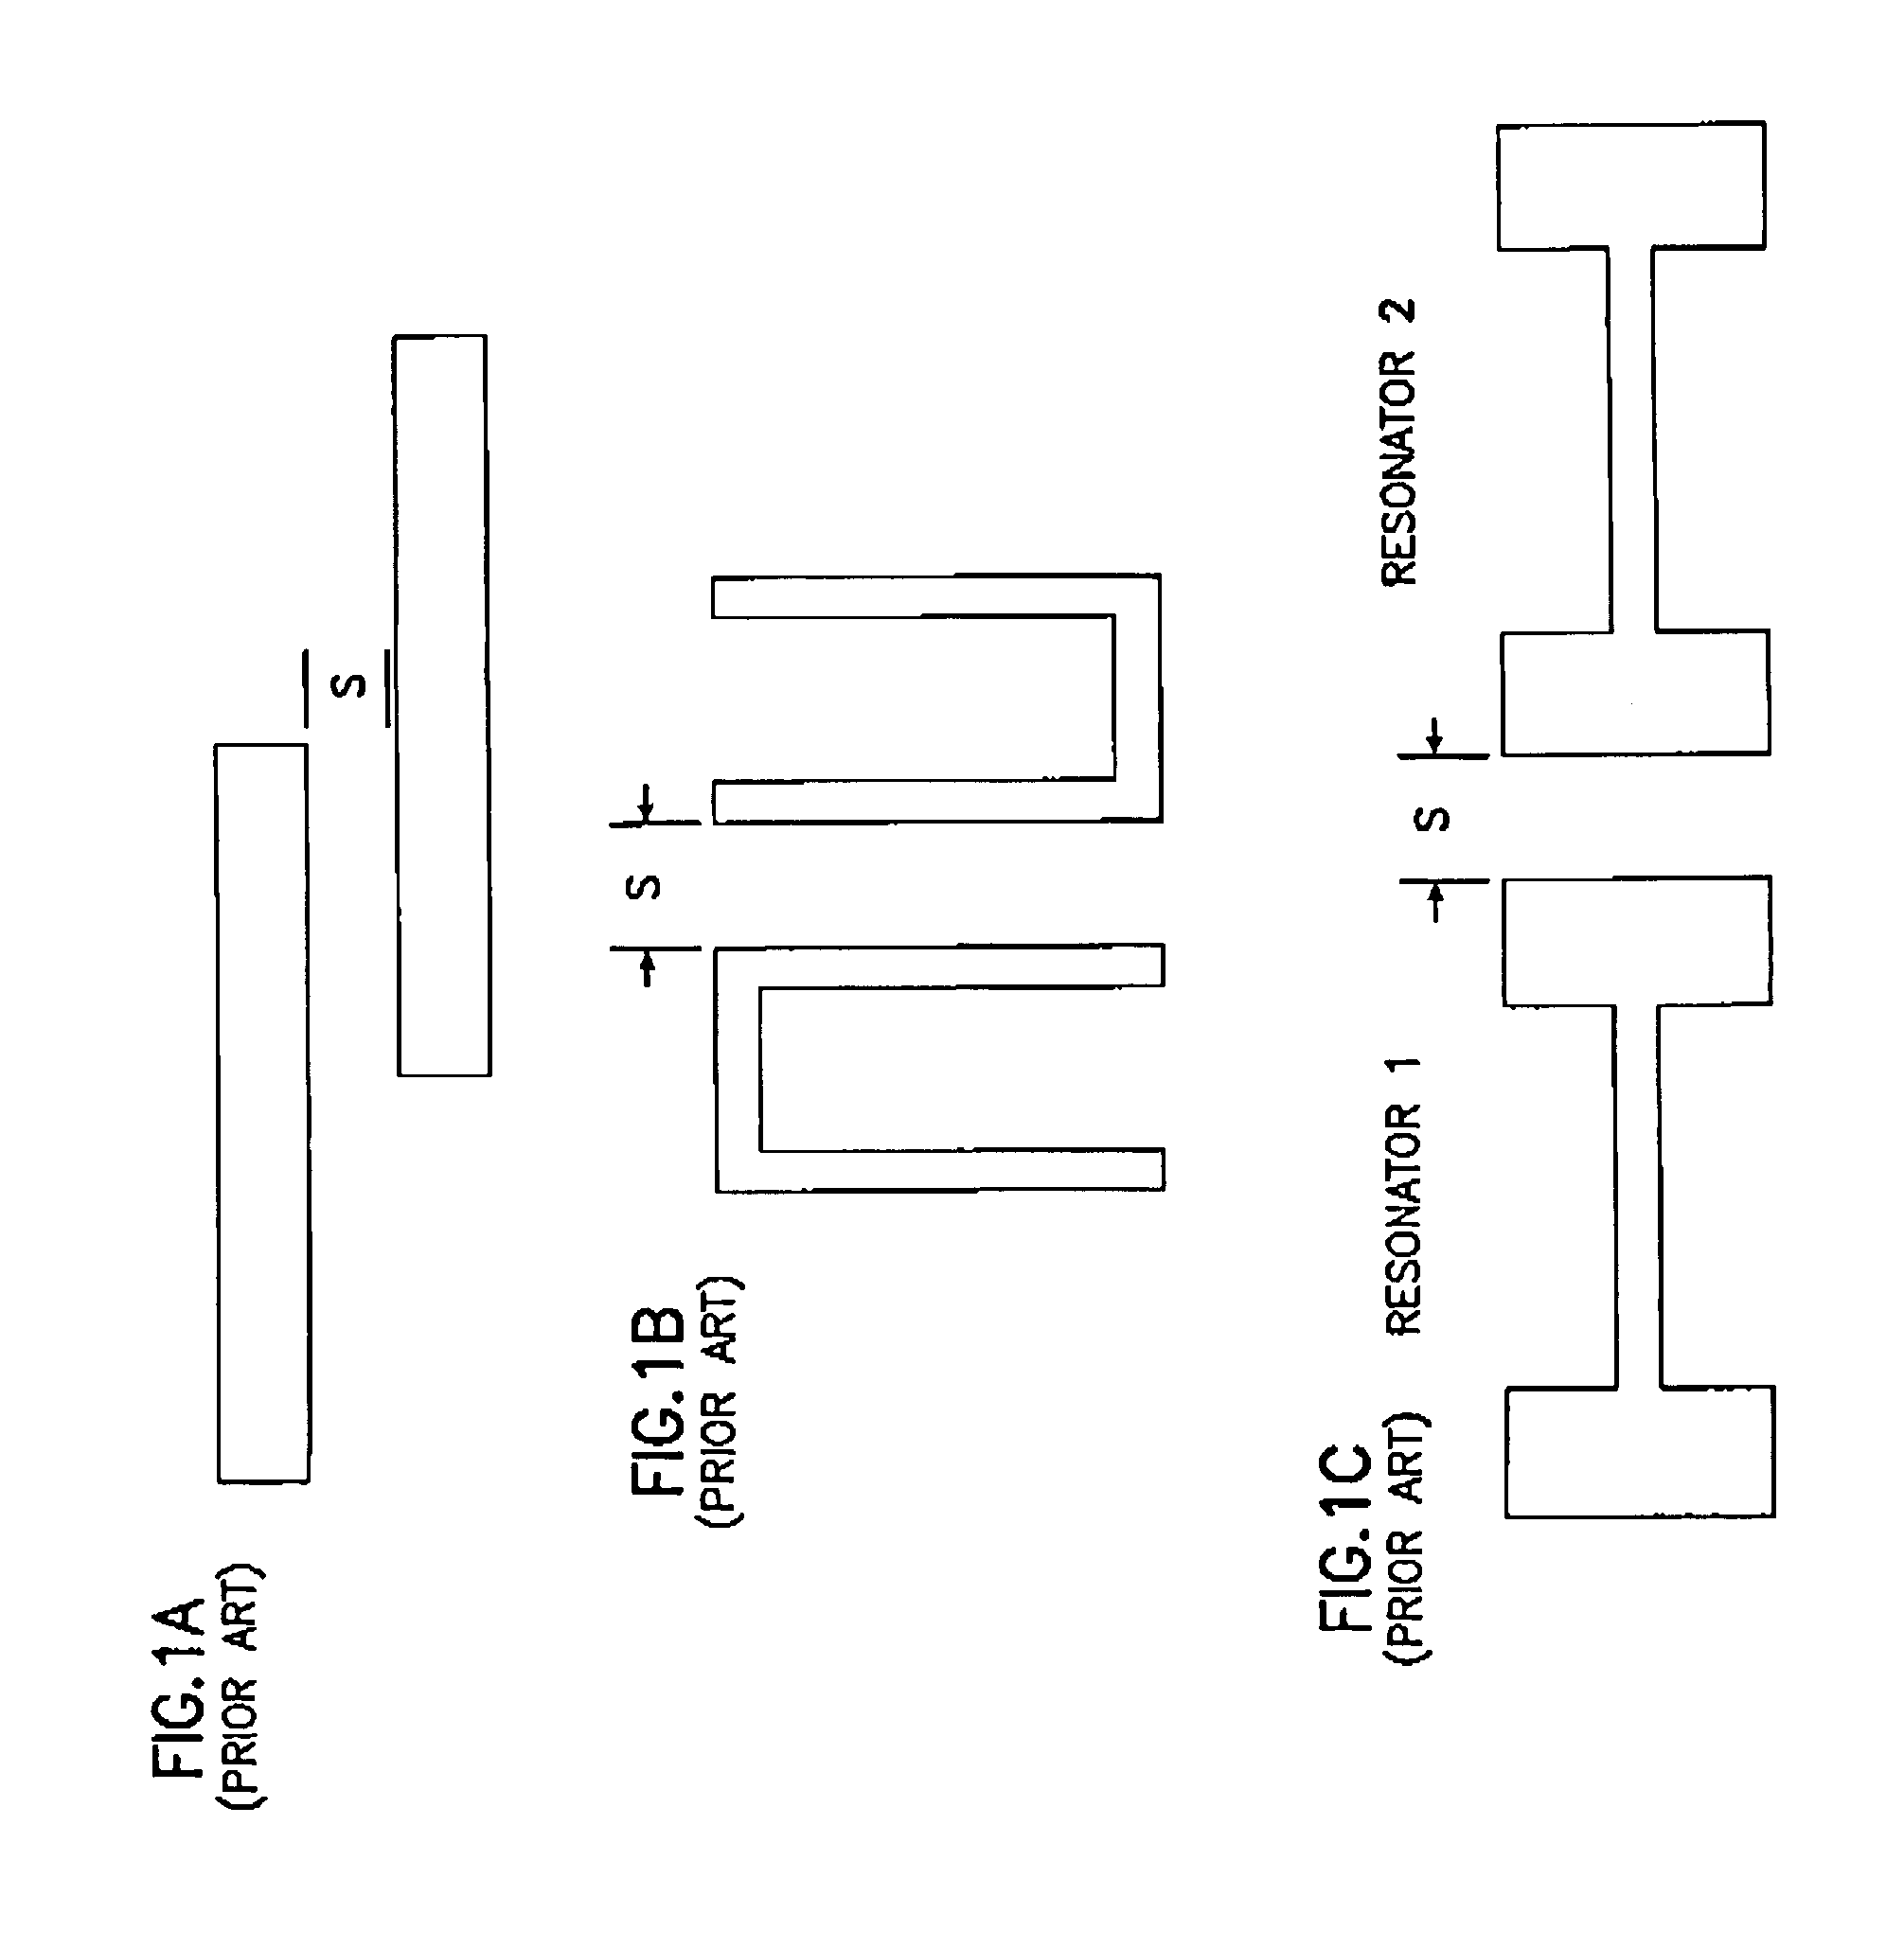 Microstrip filter including resonators having ends at different coupling distances